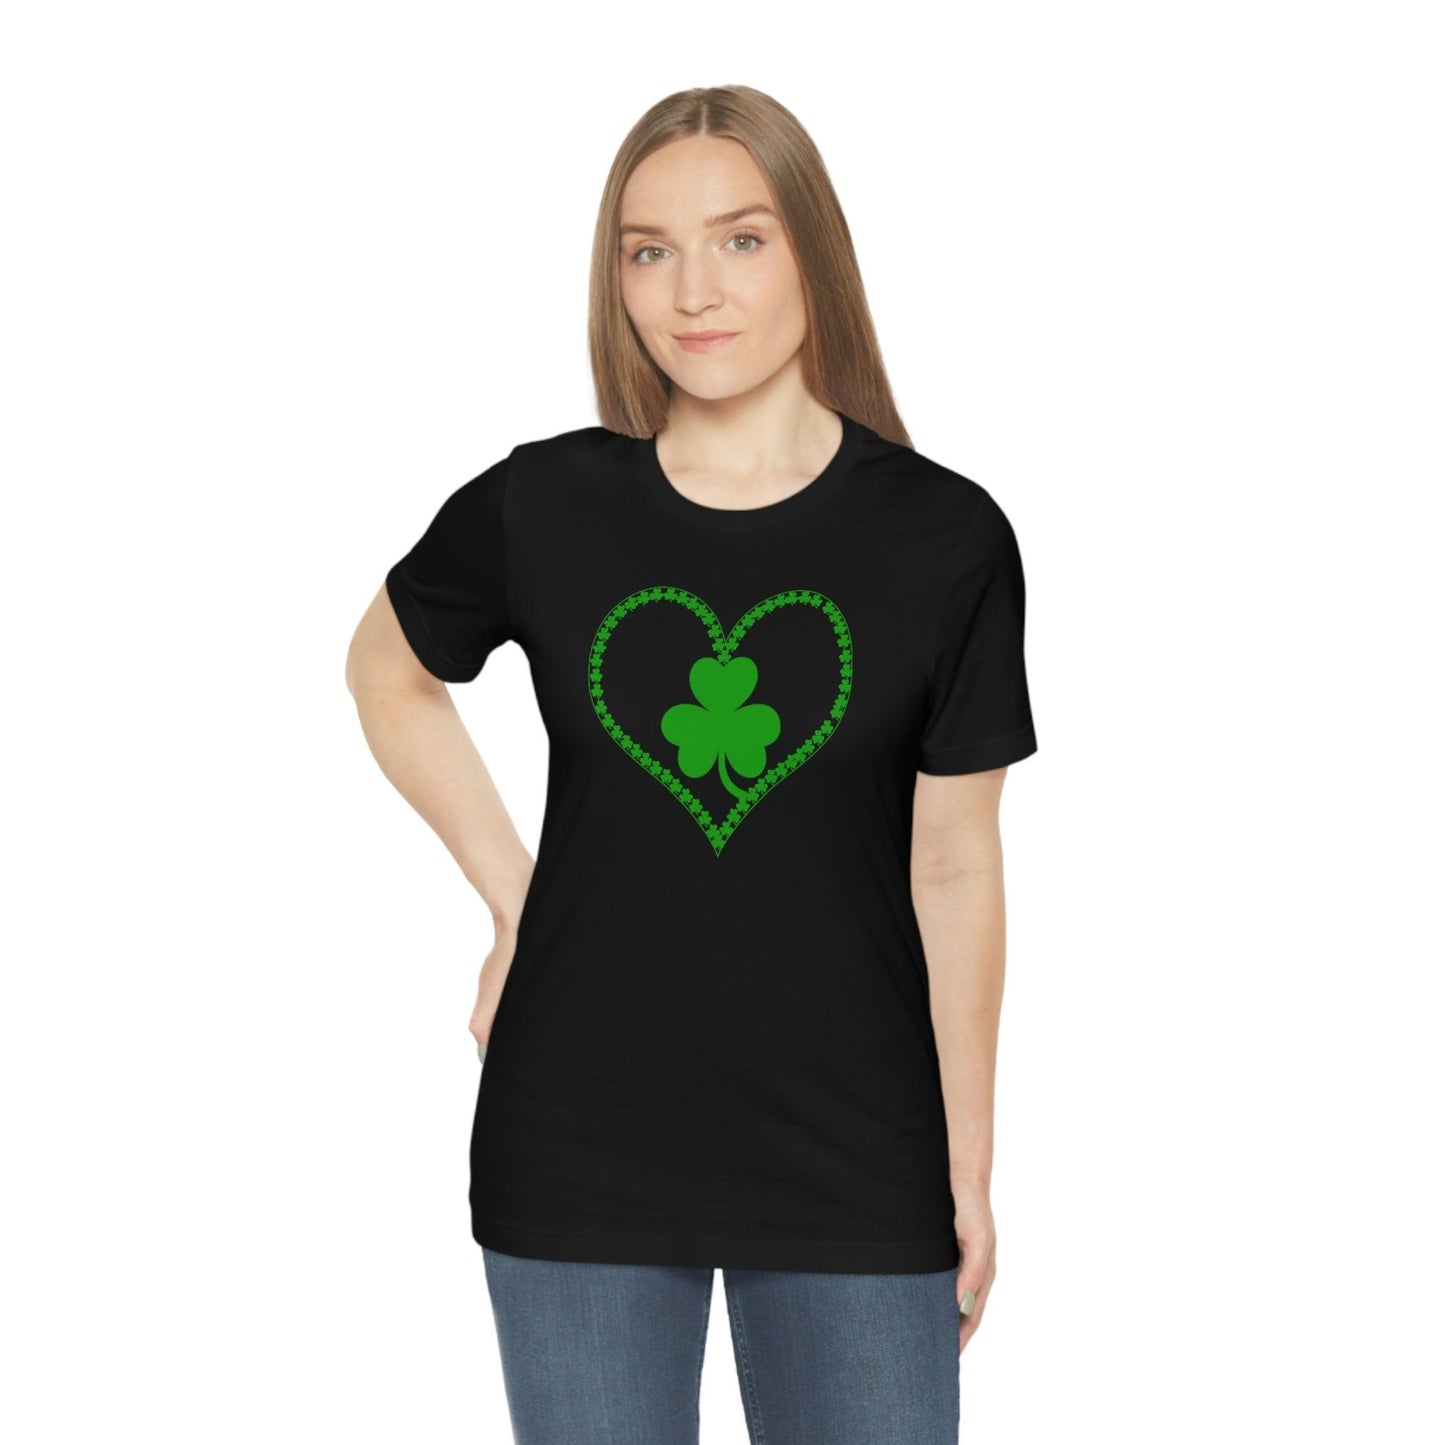 St Patrick's Day shirt Feeling Lucky Shirt One Lucky Teacher Shirt St Patrick's Day shirt - Funny St Paddy's day Funny Shirt Shamrock shirt - Giftsmojo